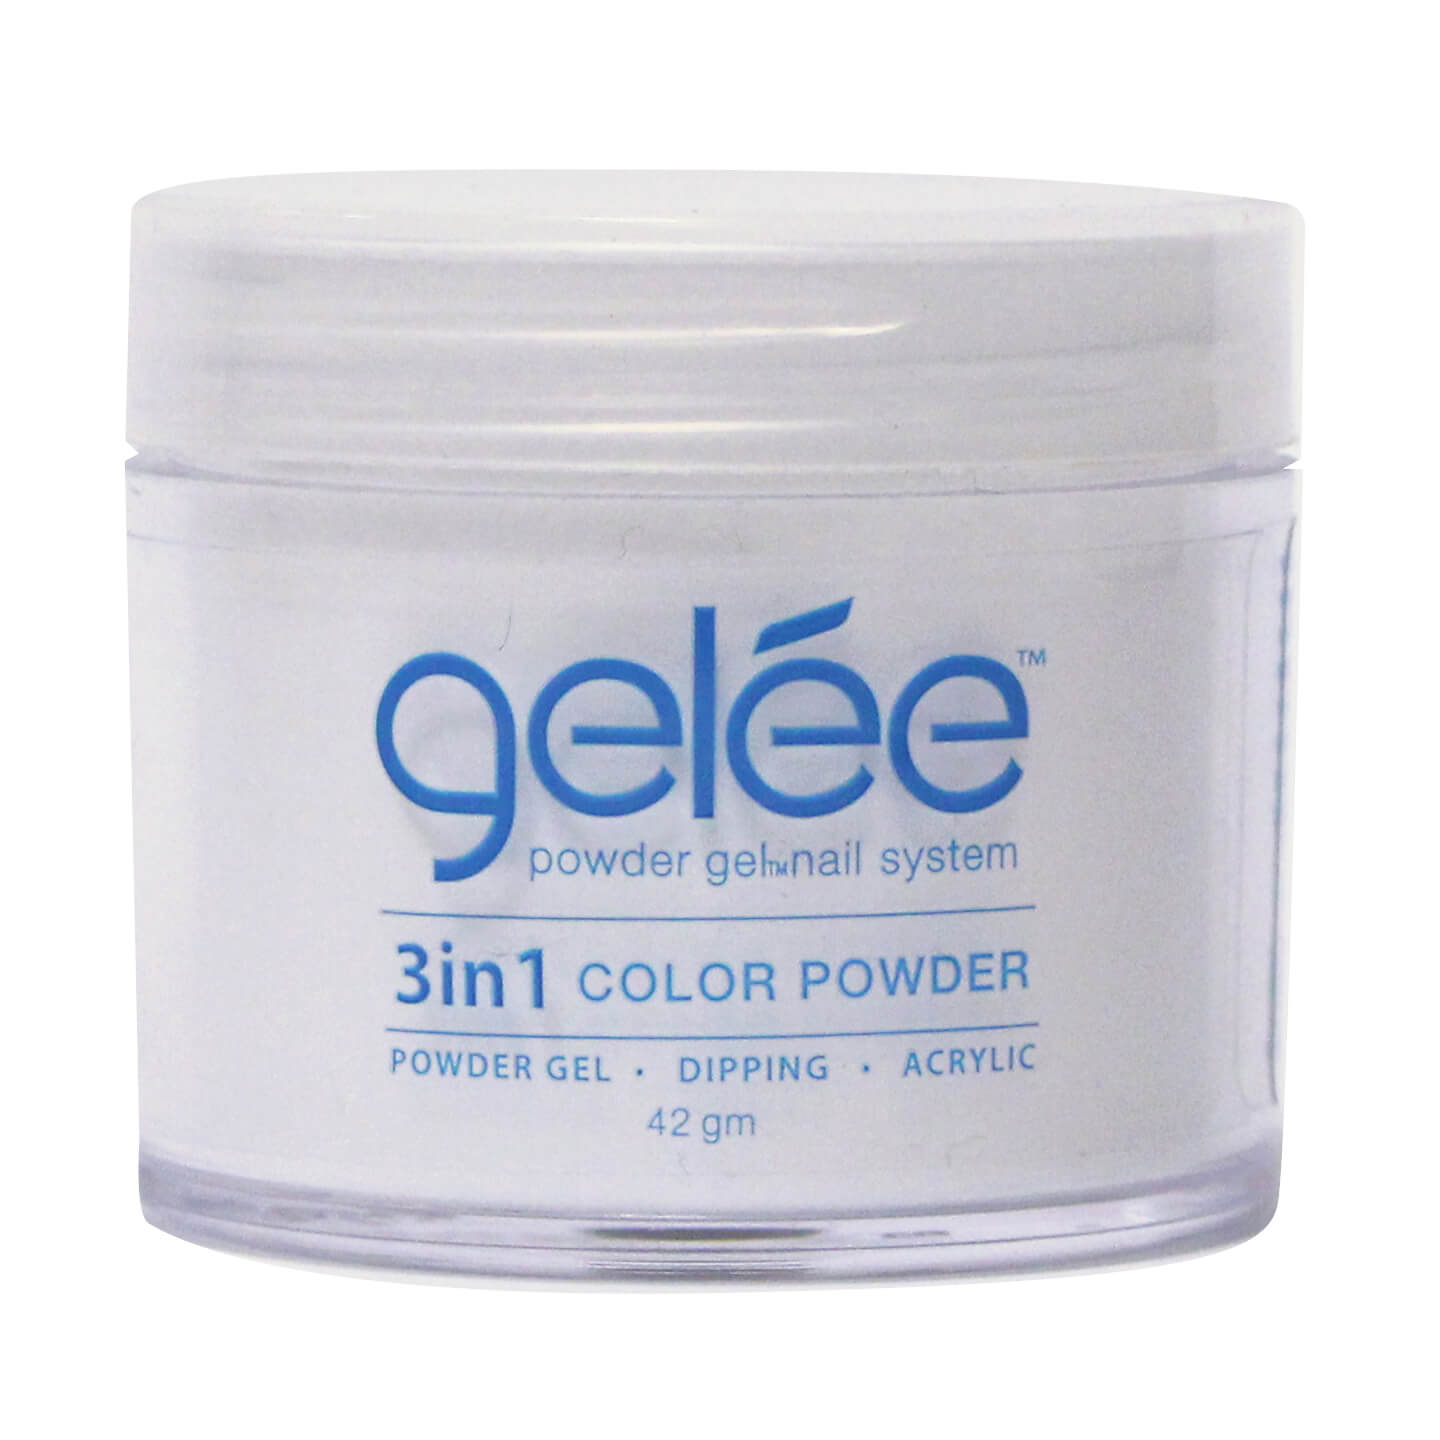 Gelee 3 in 1 Powder - Classic Natural 1.48 oz - #GCP03 - Premier Nail Supply 